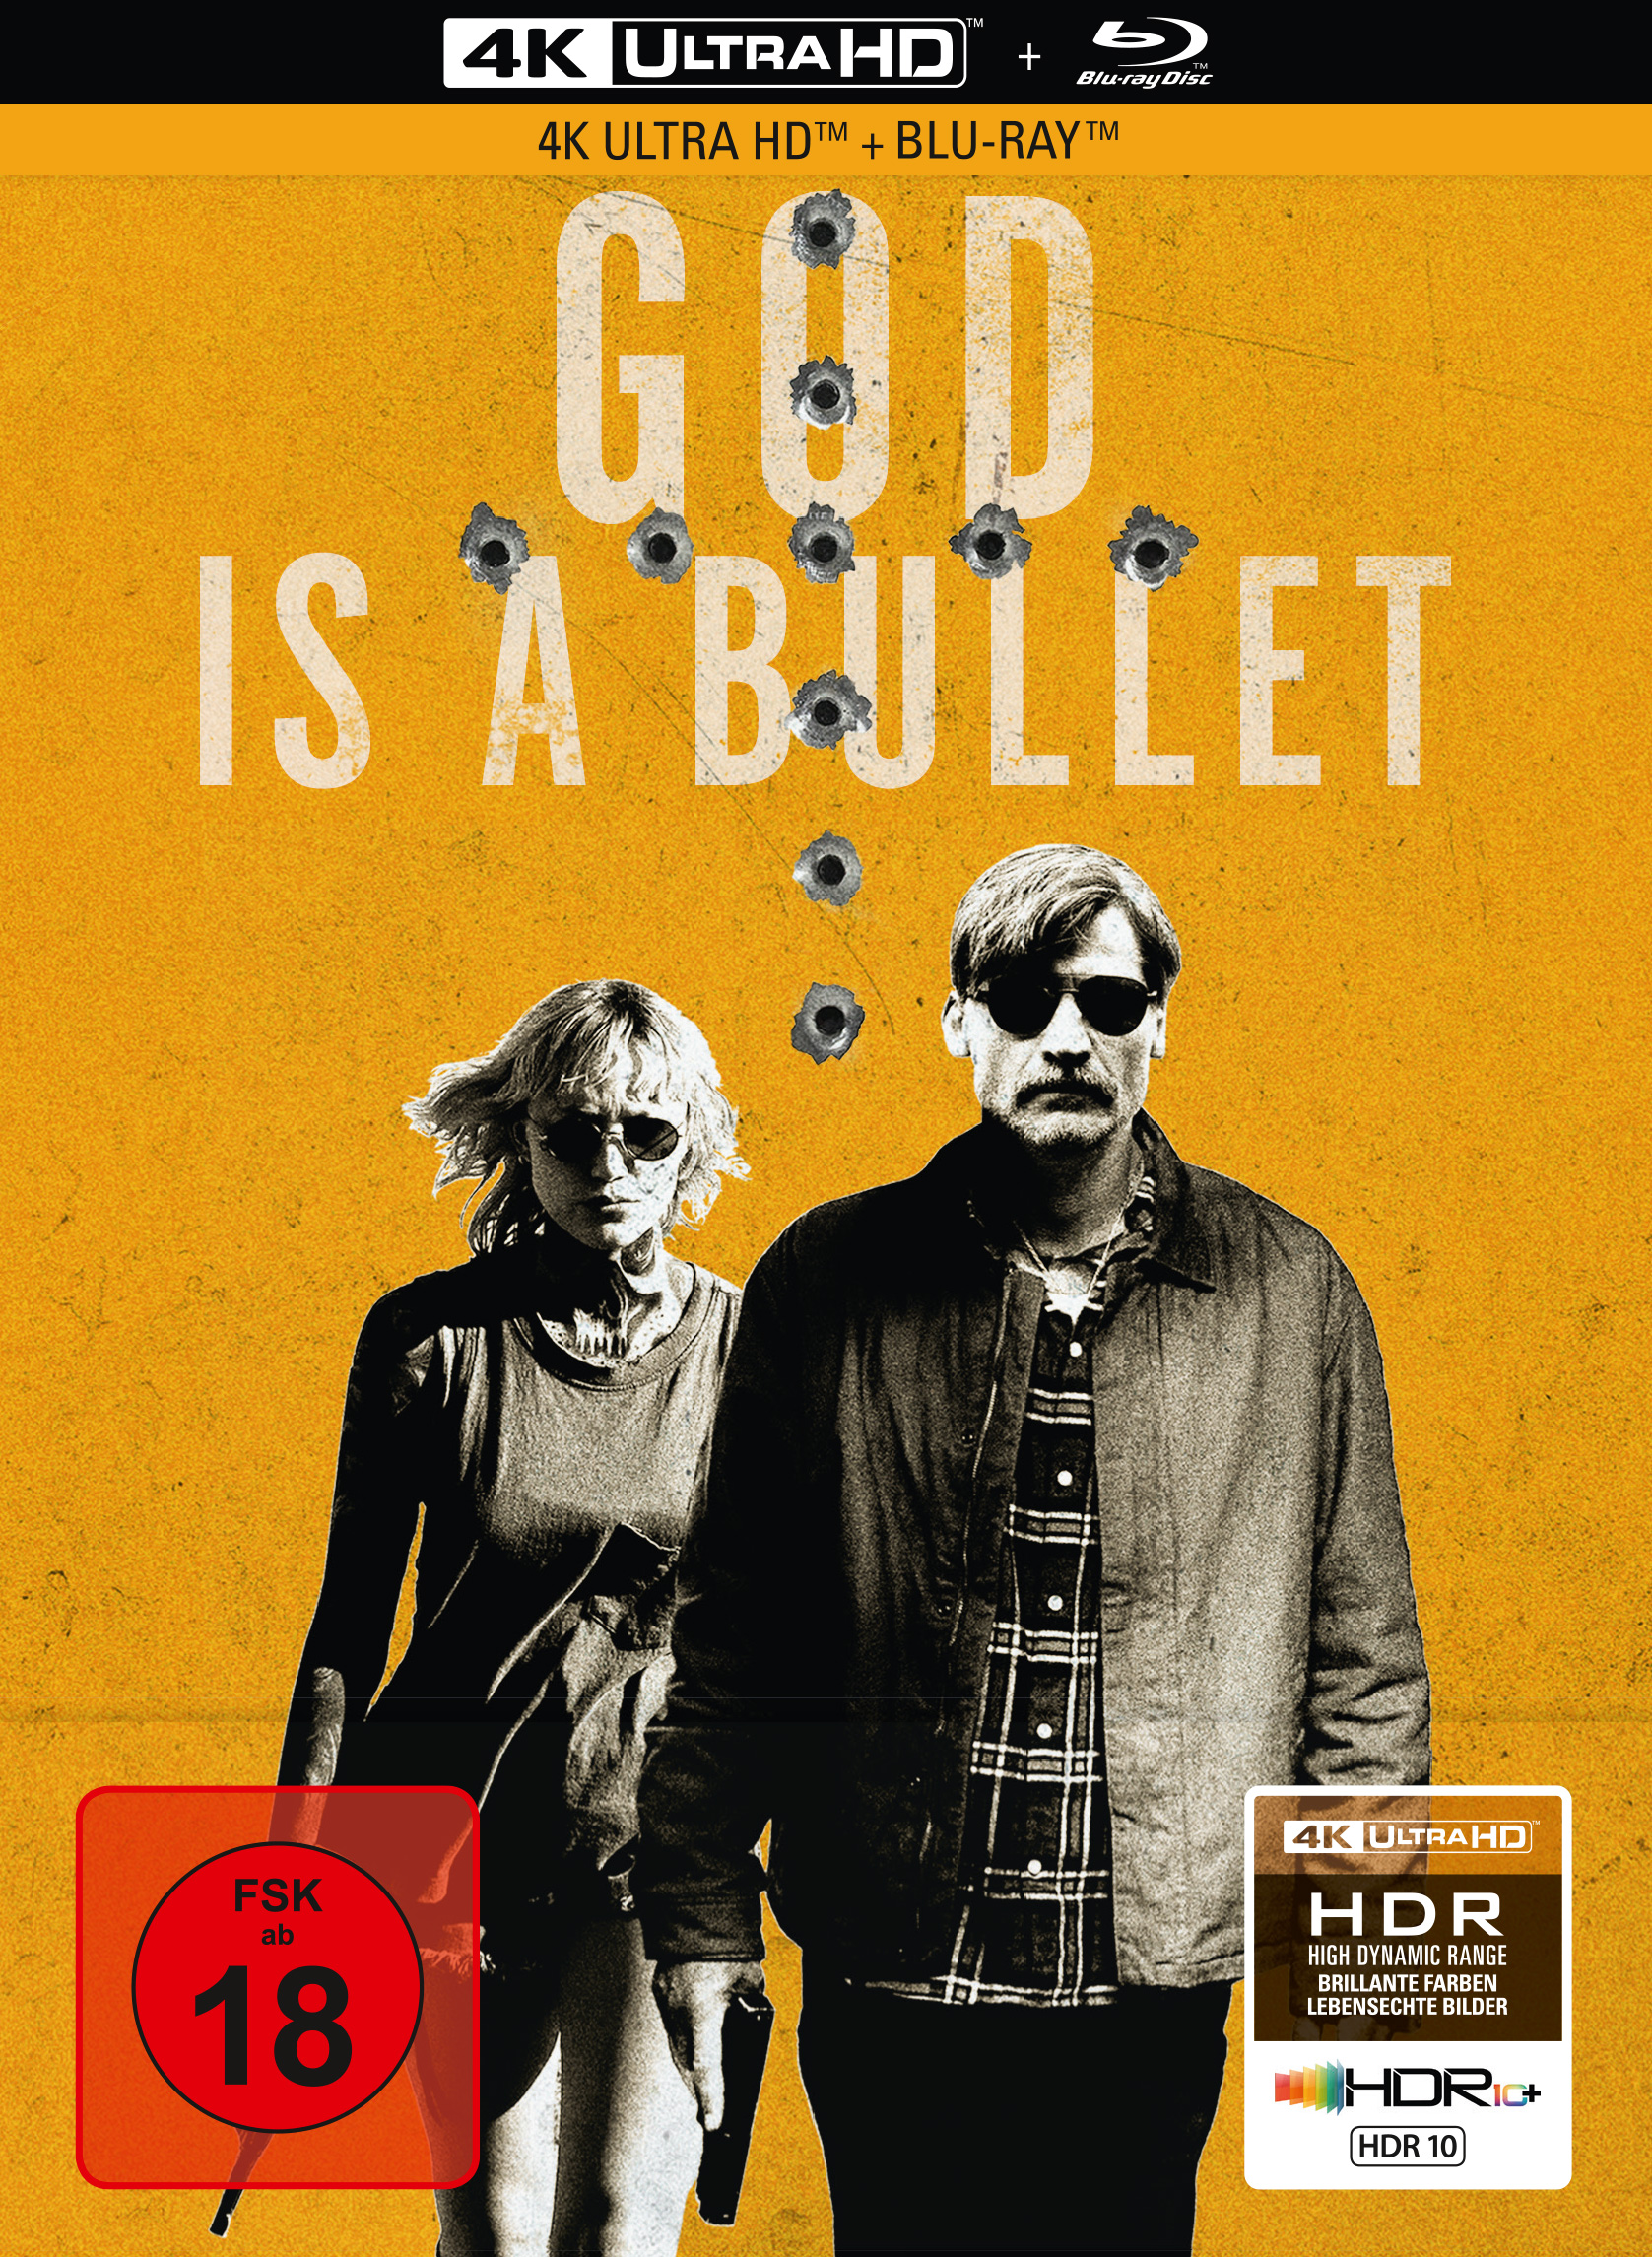 God Is a Bullet - 2-Disc Limited Collector's Edition im Mediabook (UHD-Blu-ray + Blu-ray)